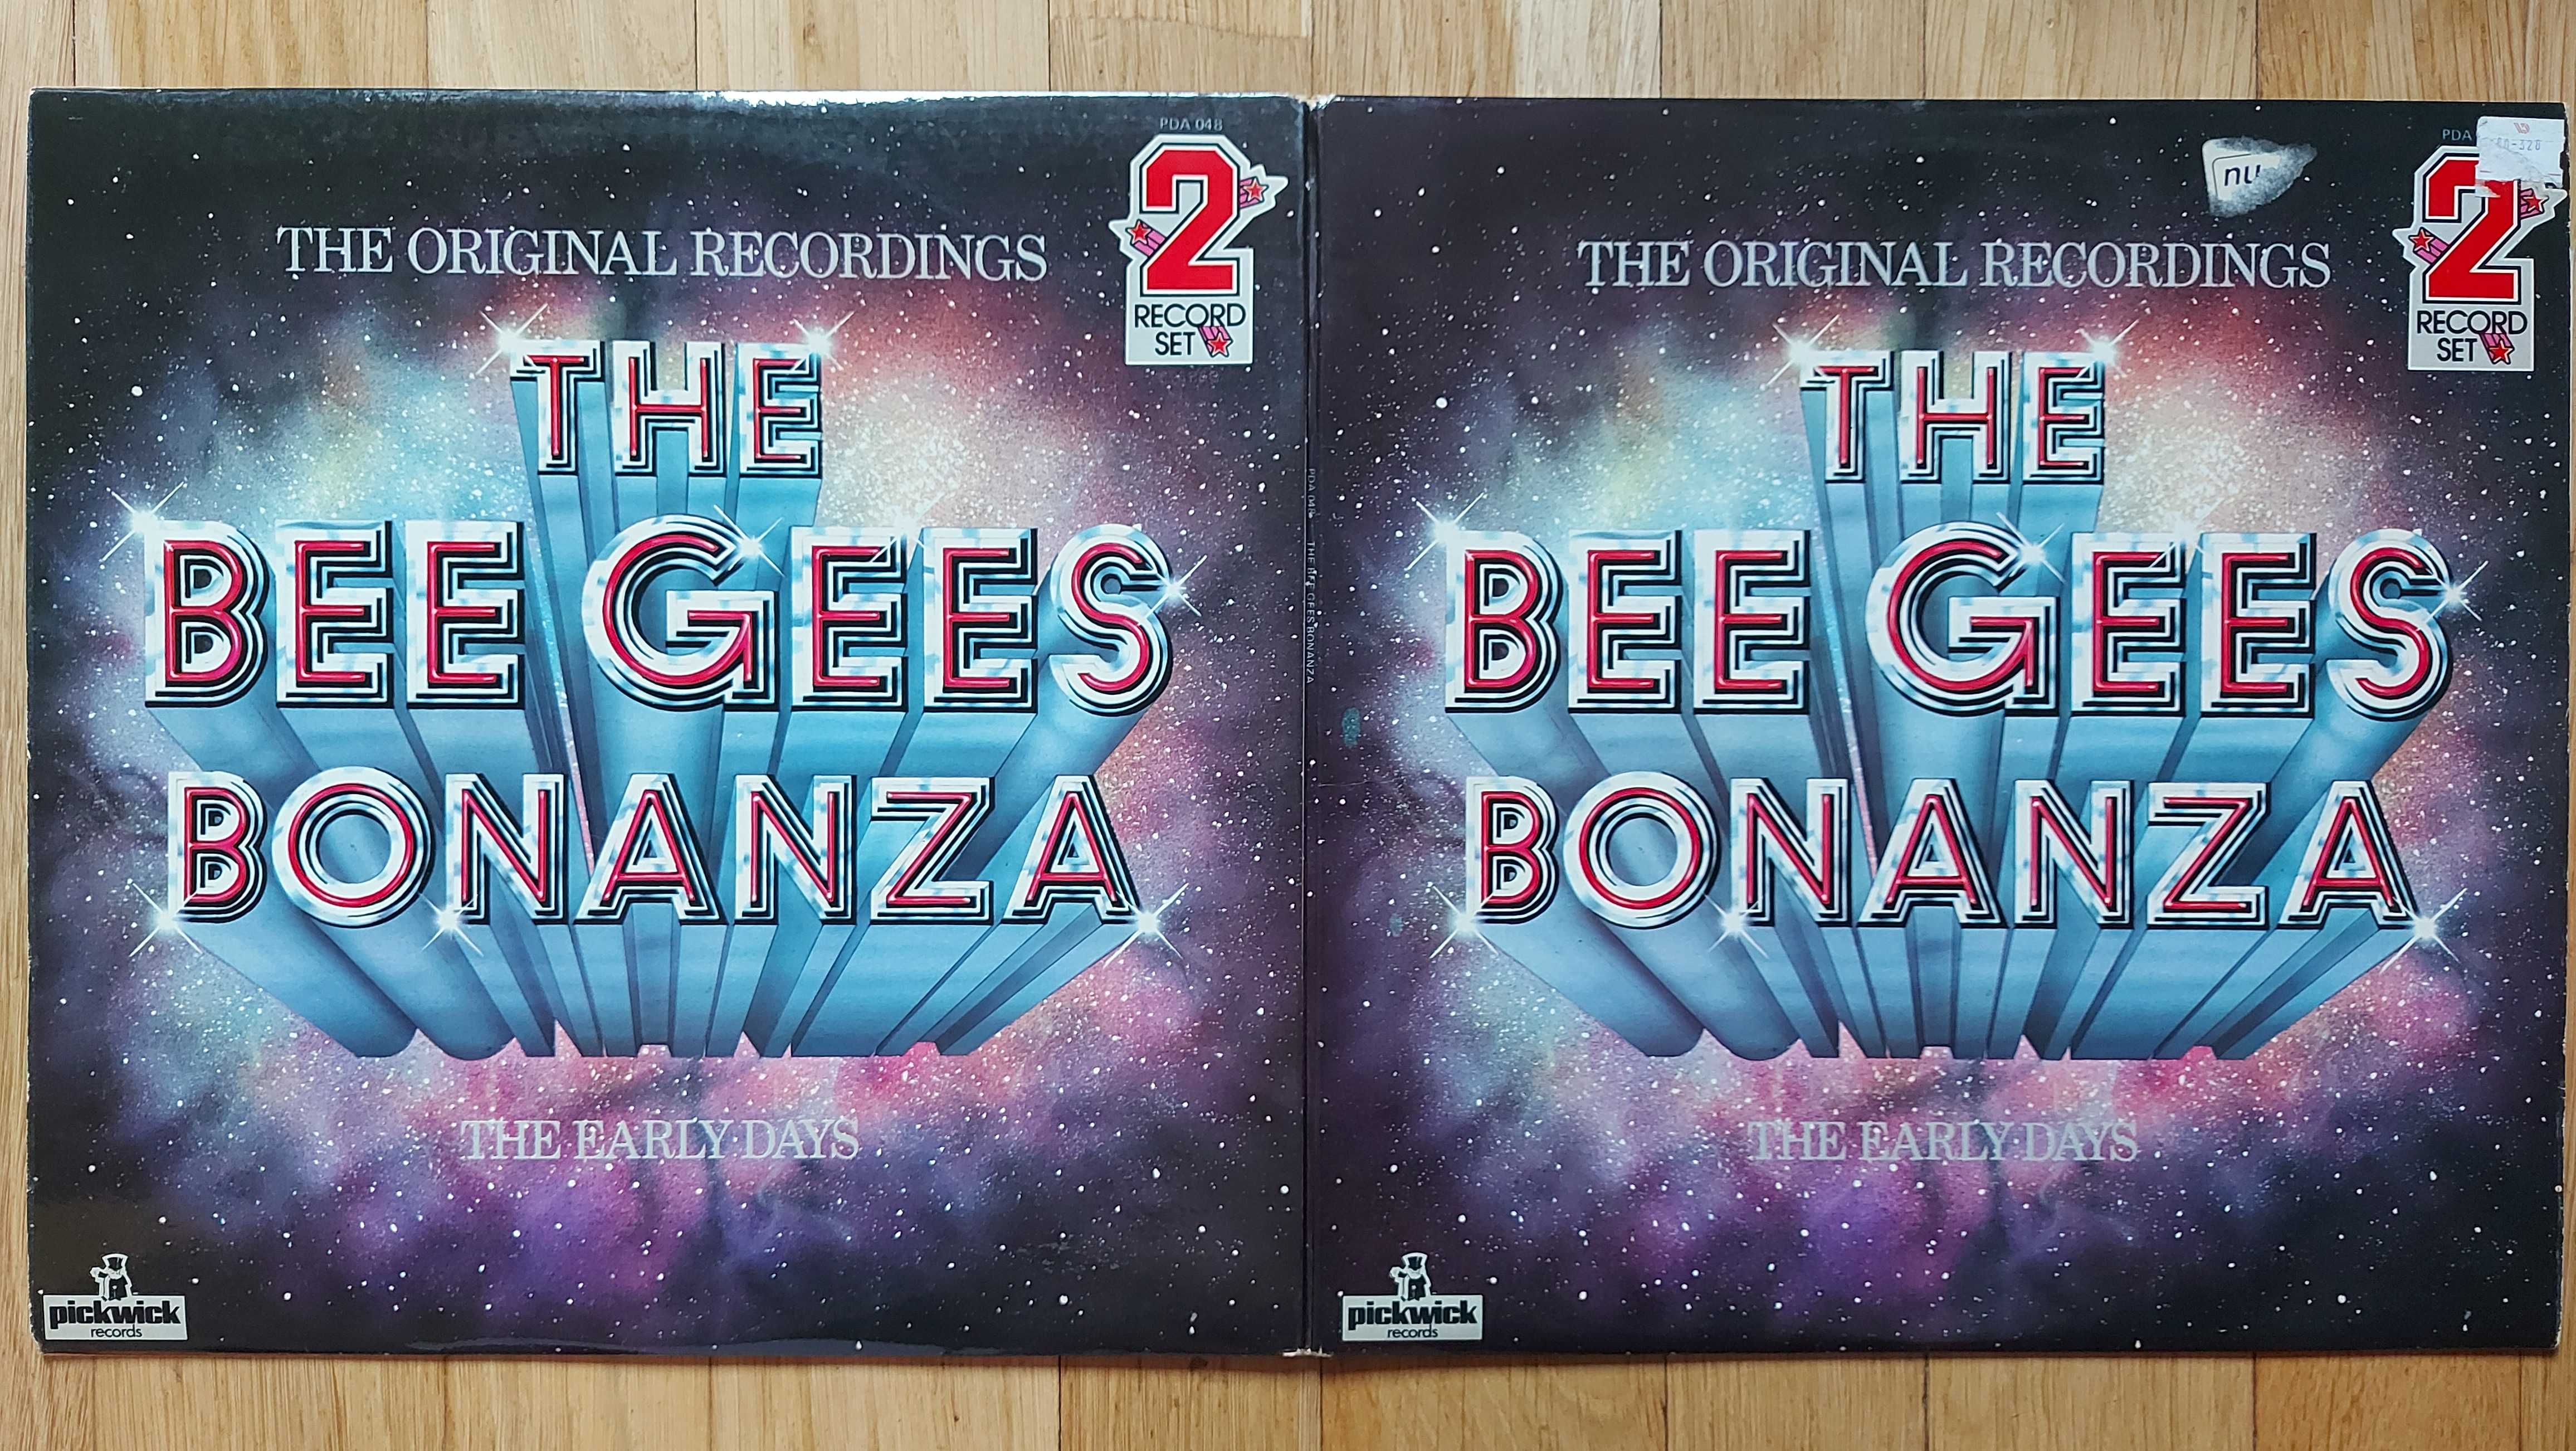 Bee Gees ‎The Bee Gees Bonanza (The Early Days)  Aug 1978 UK (NM-/EX)